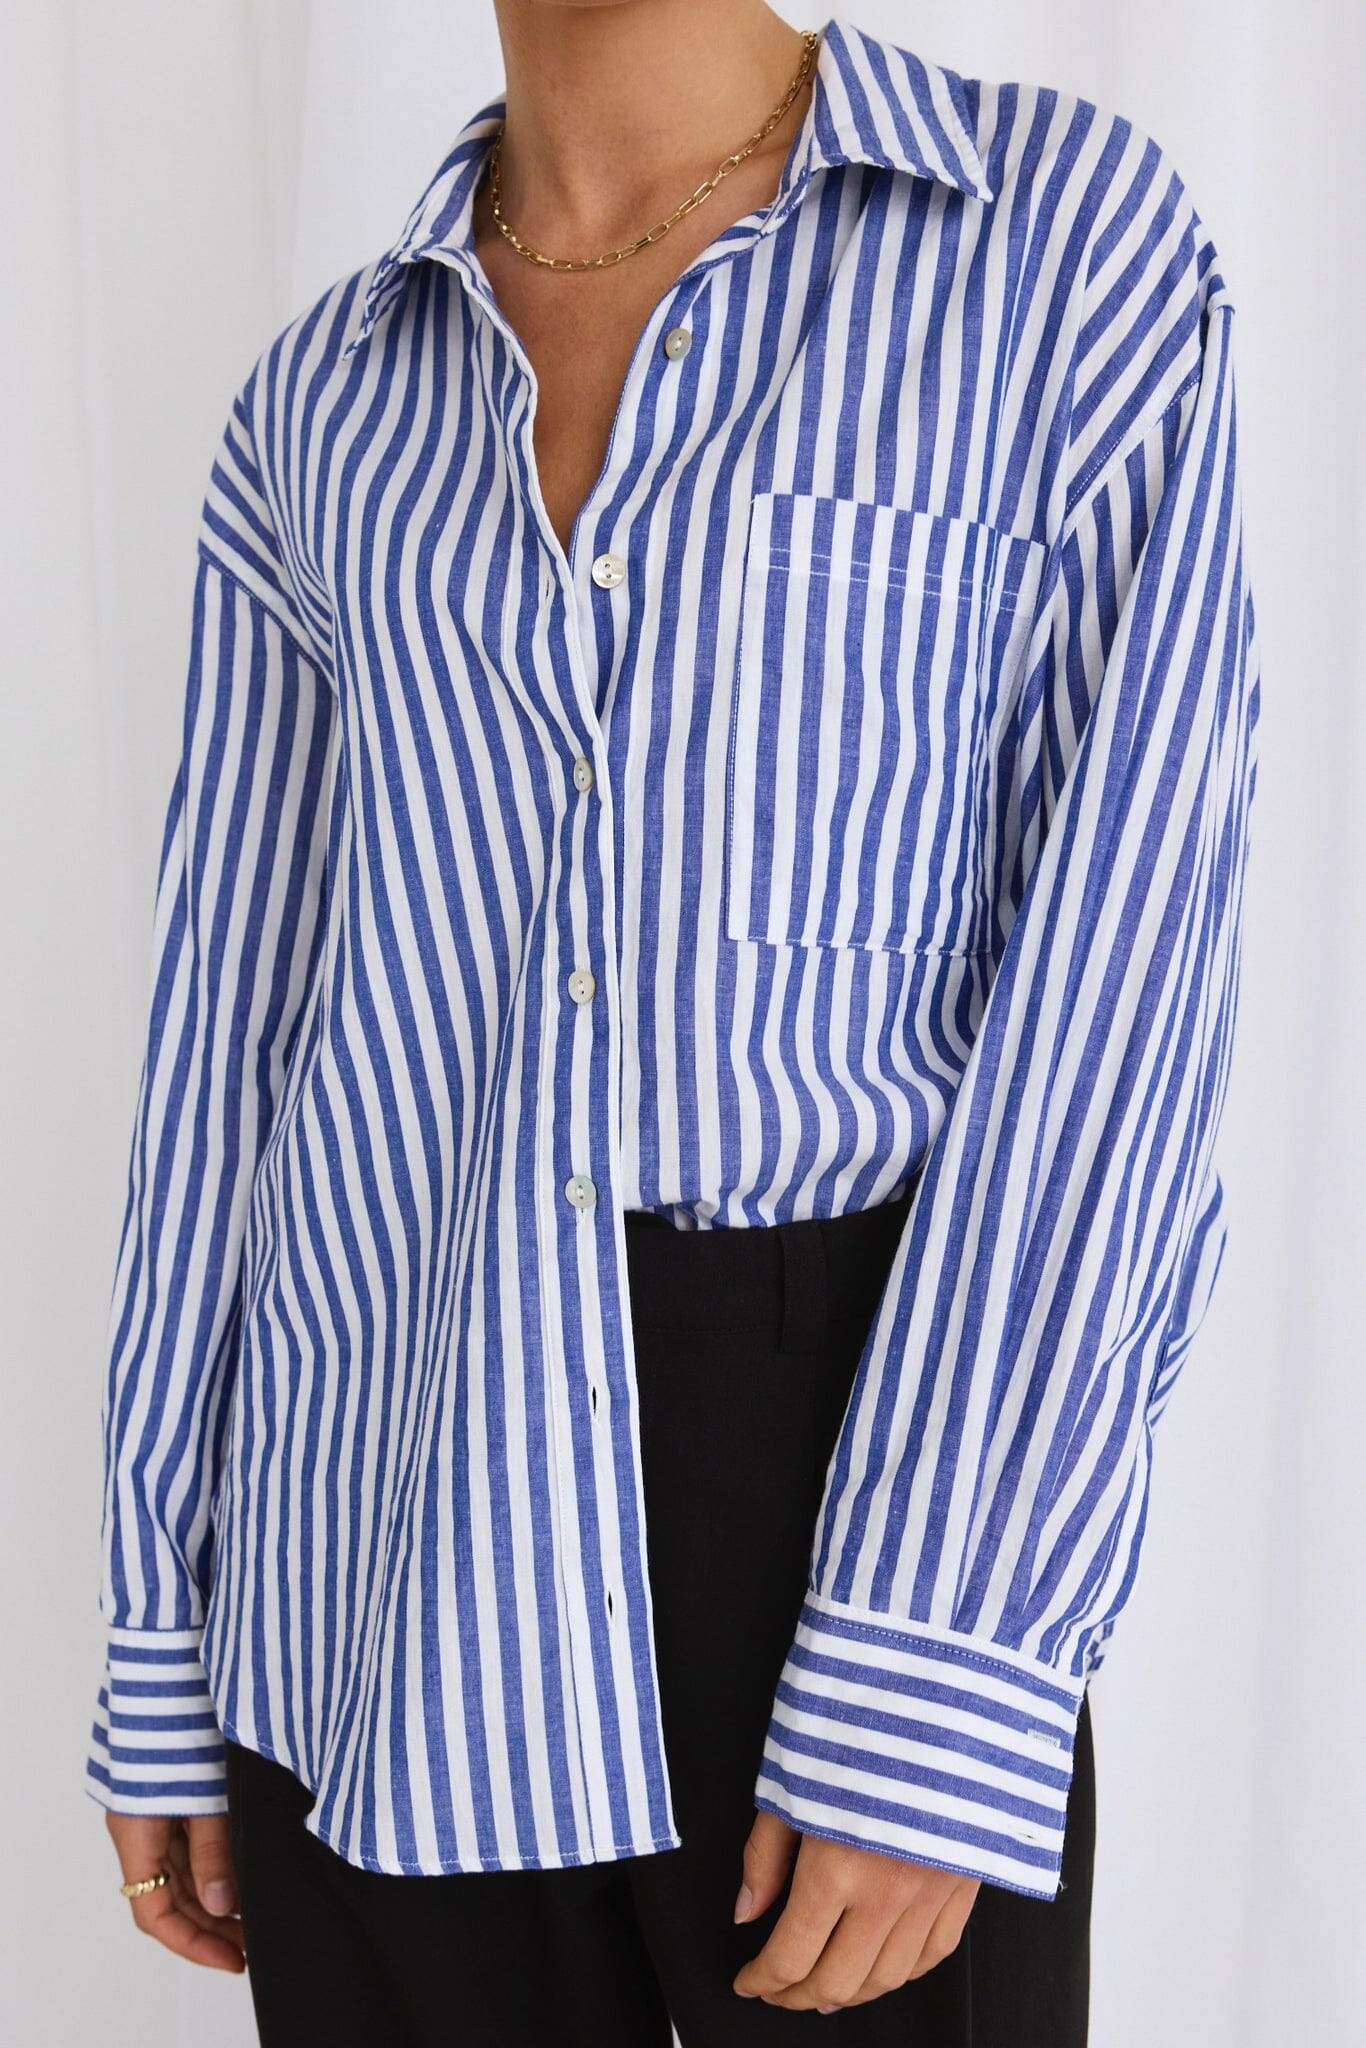 Stories Be Told - You Got This Shirt - Blue Stripe Womens Stories Be Told